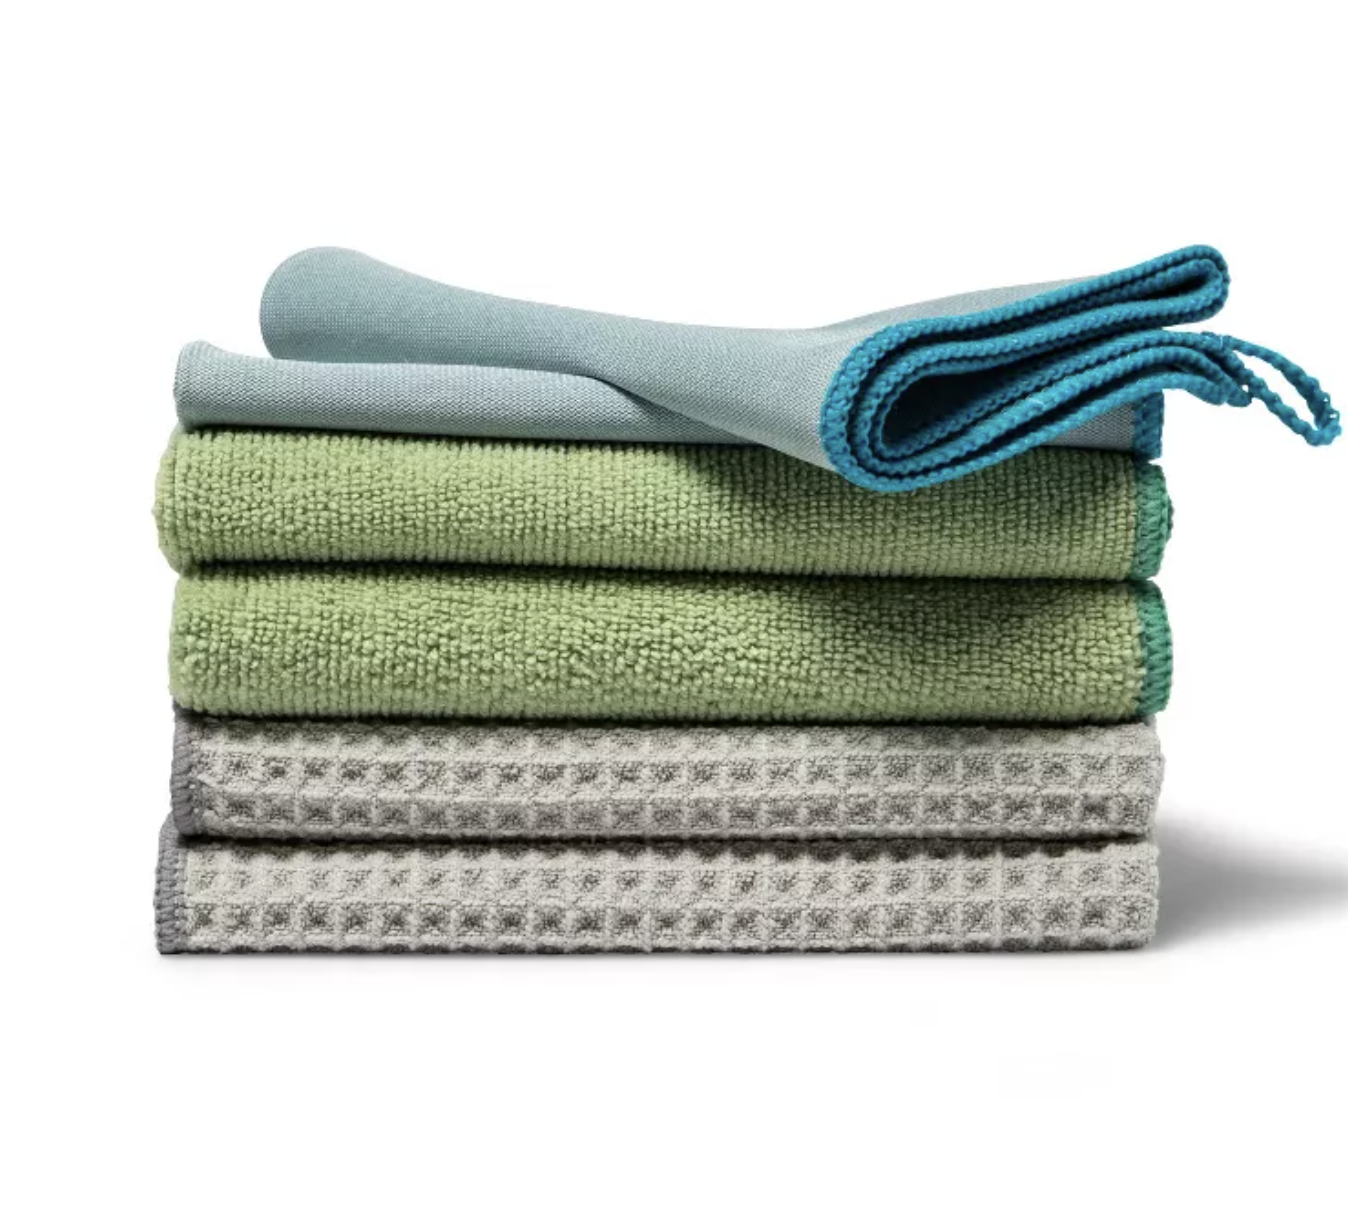 a stack of three differently textured microfiber towels